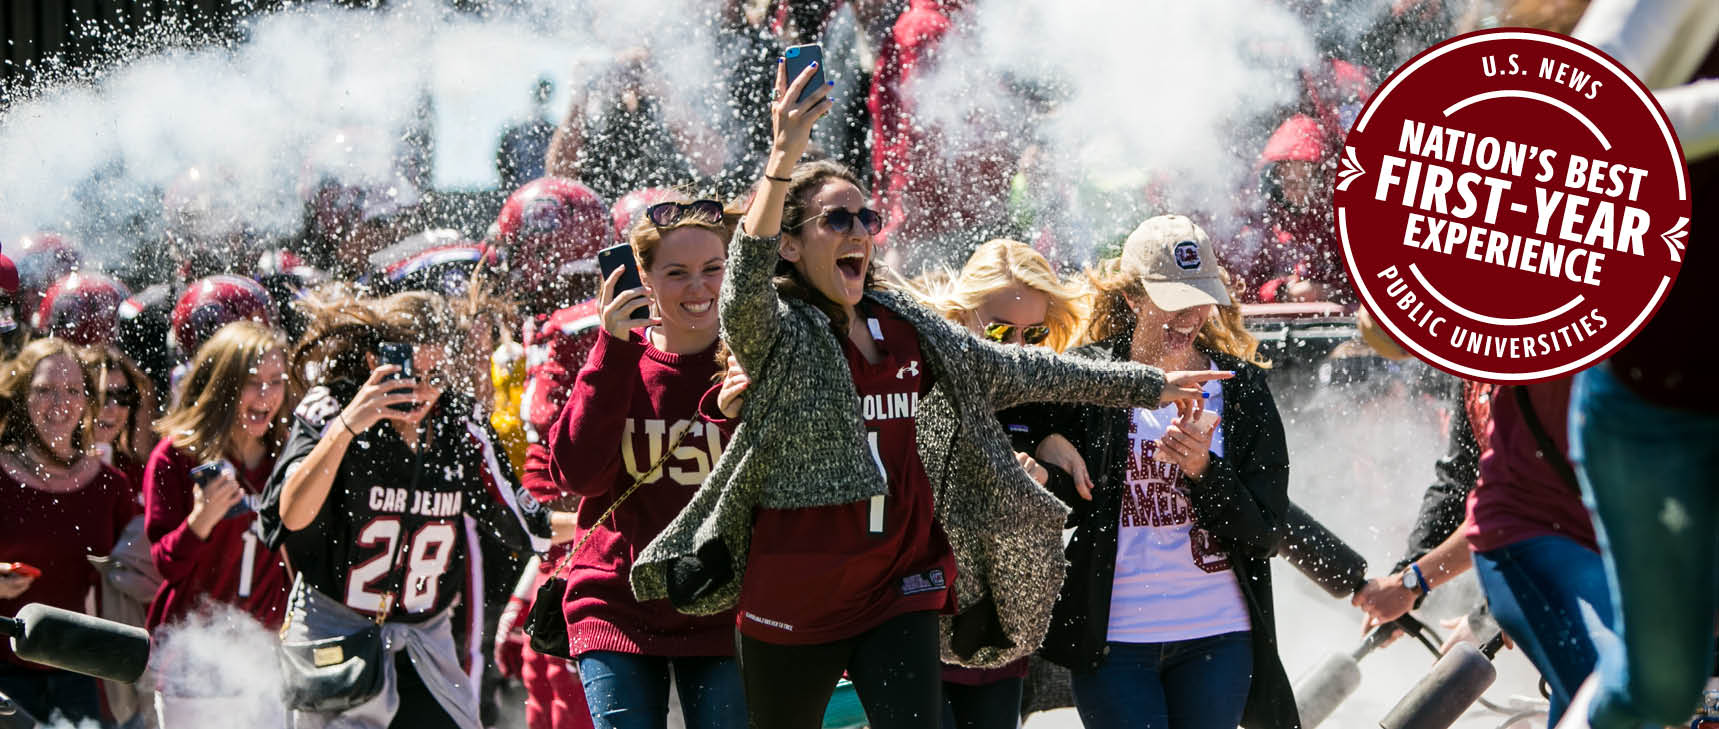 Students running out the tunnel at Williams-Brice stadium with overlaid stamp stating US News Public University Nation's Best First-Year Experience.